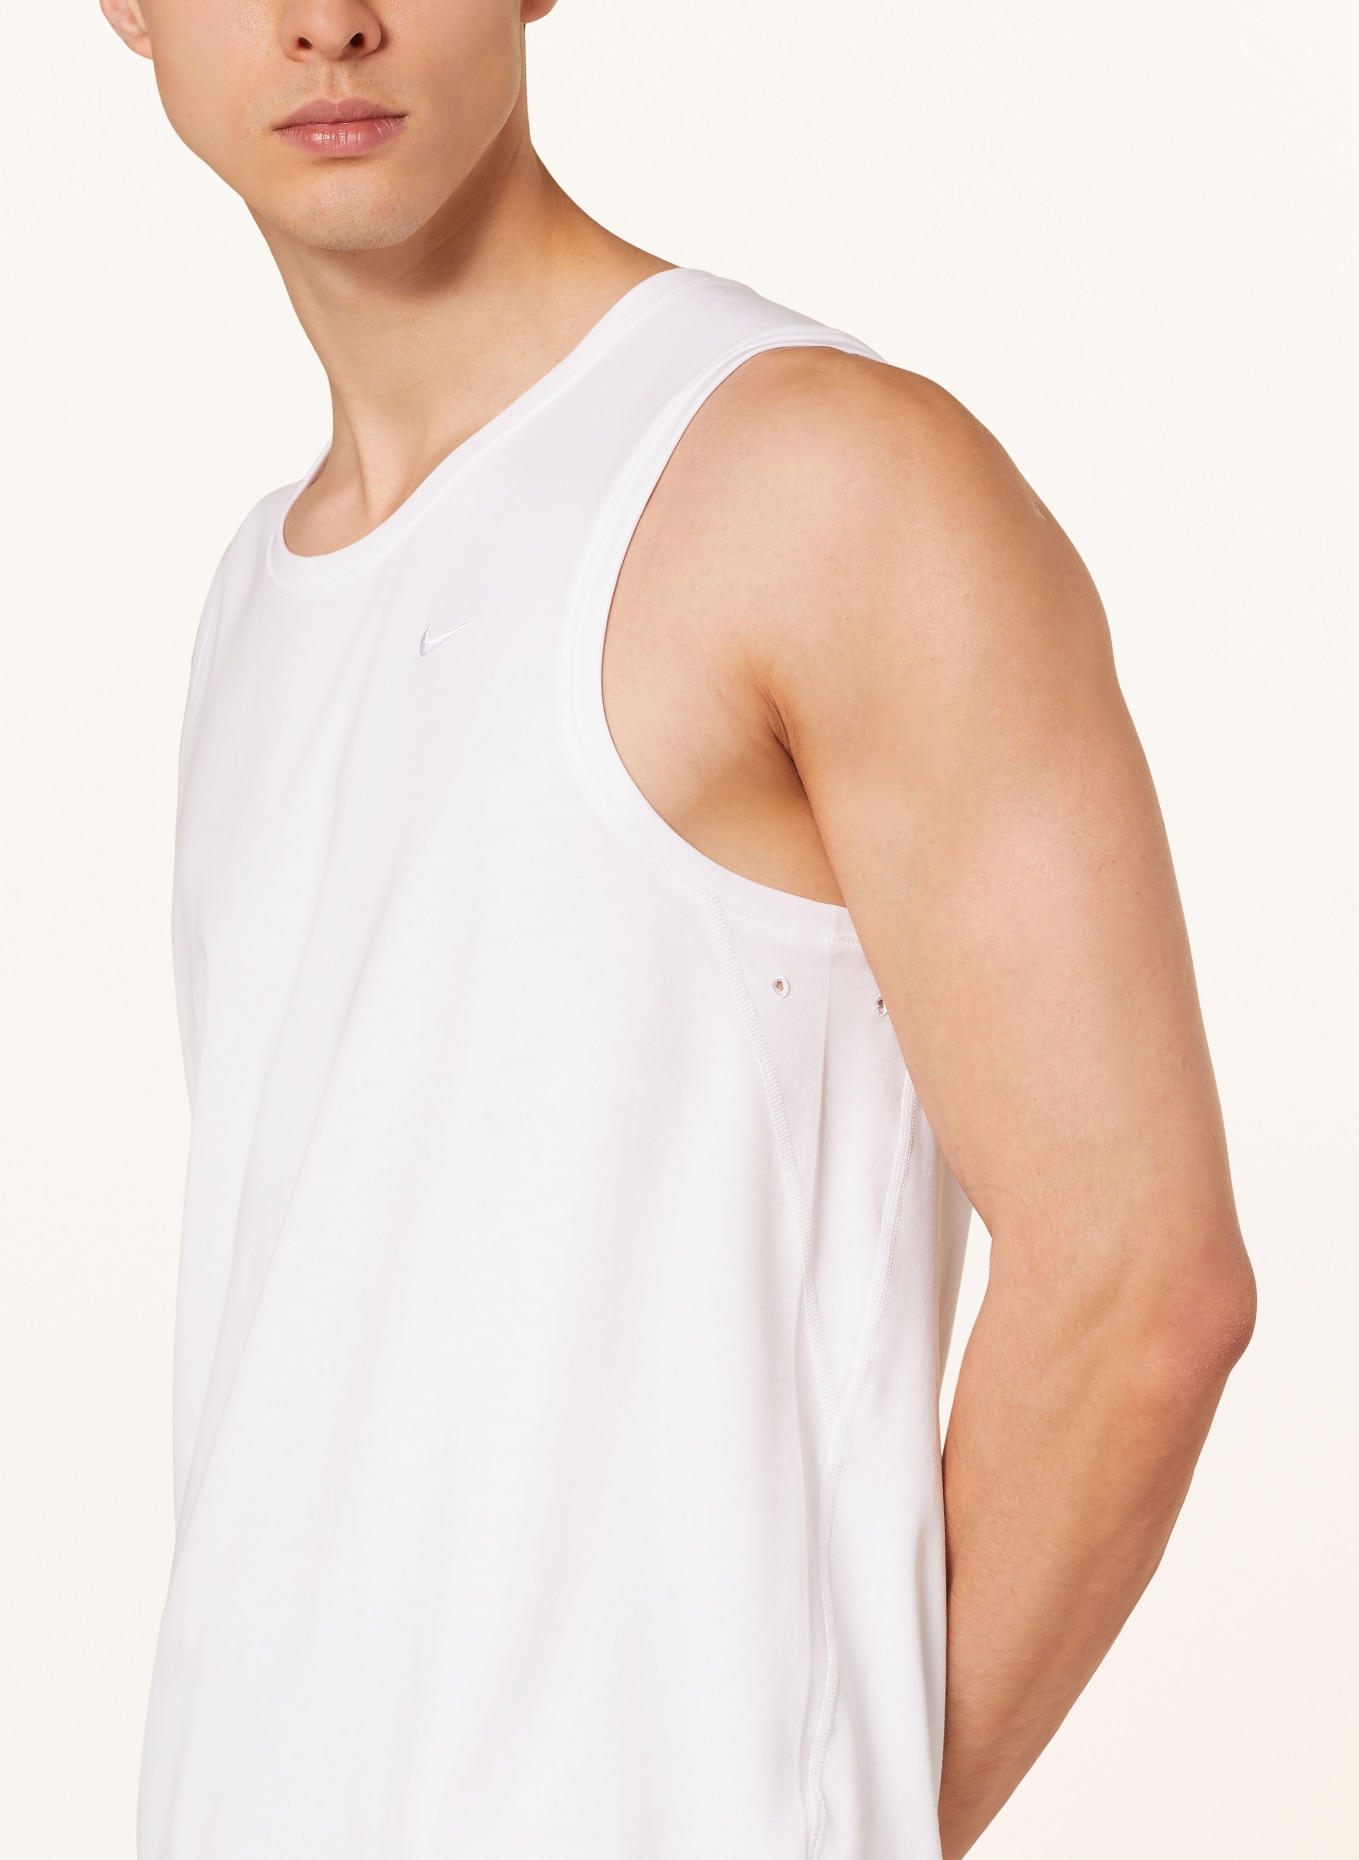 Nike Tank top PRIMARY, Color: WHITE (Image 4)